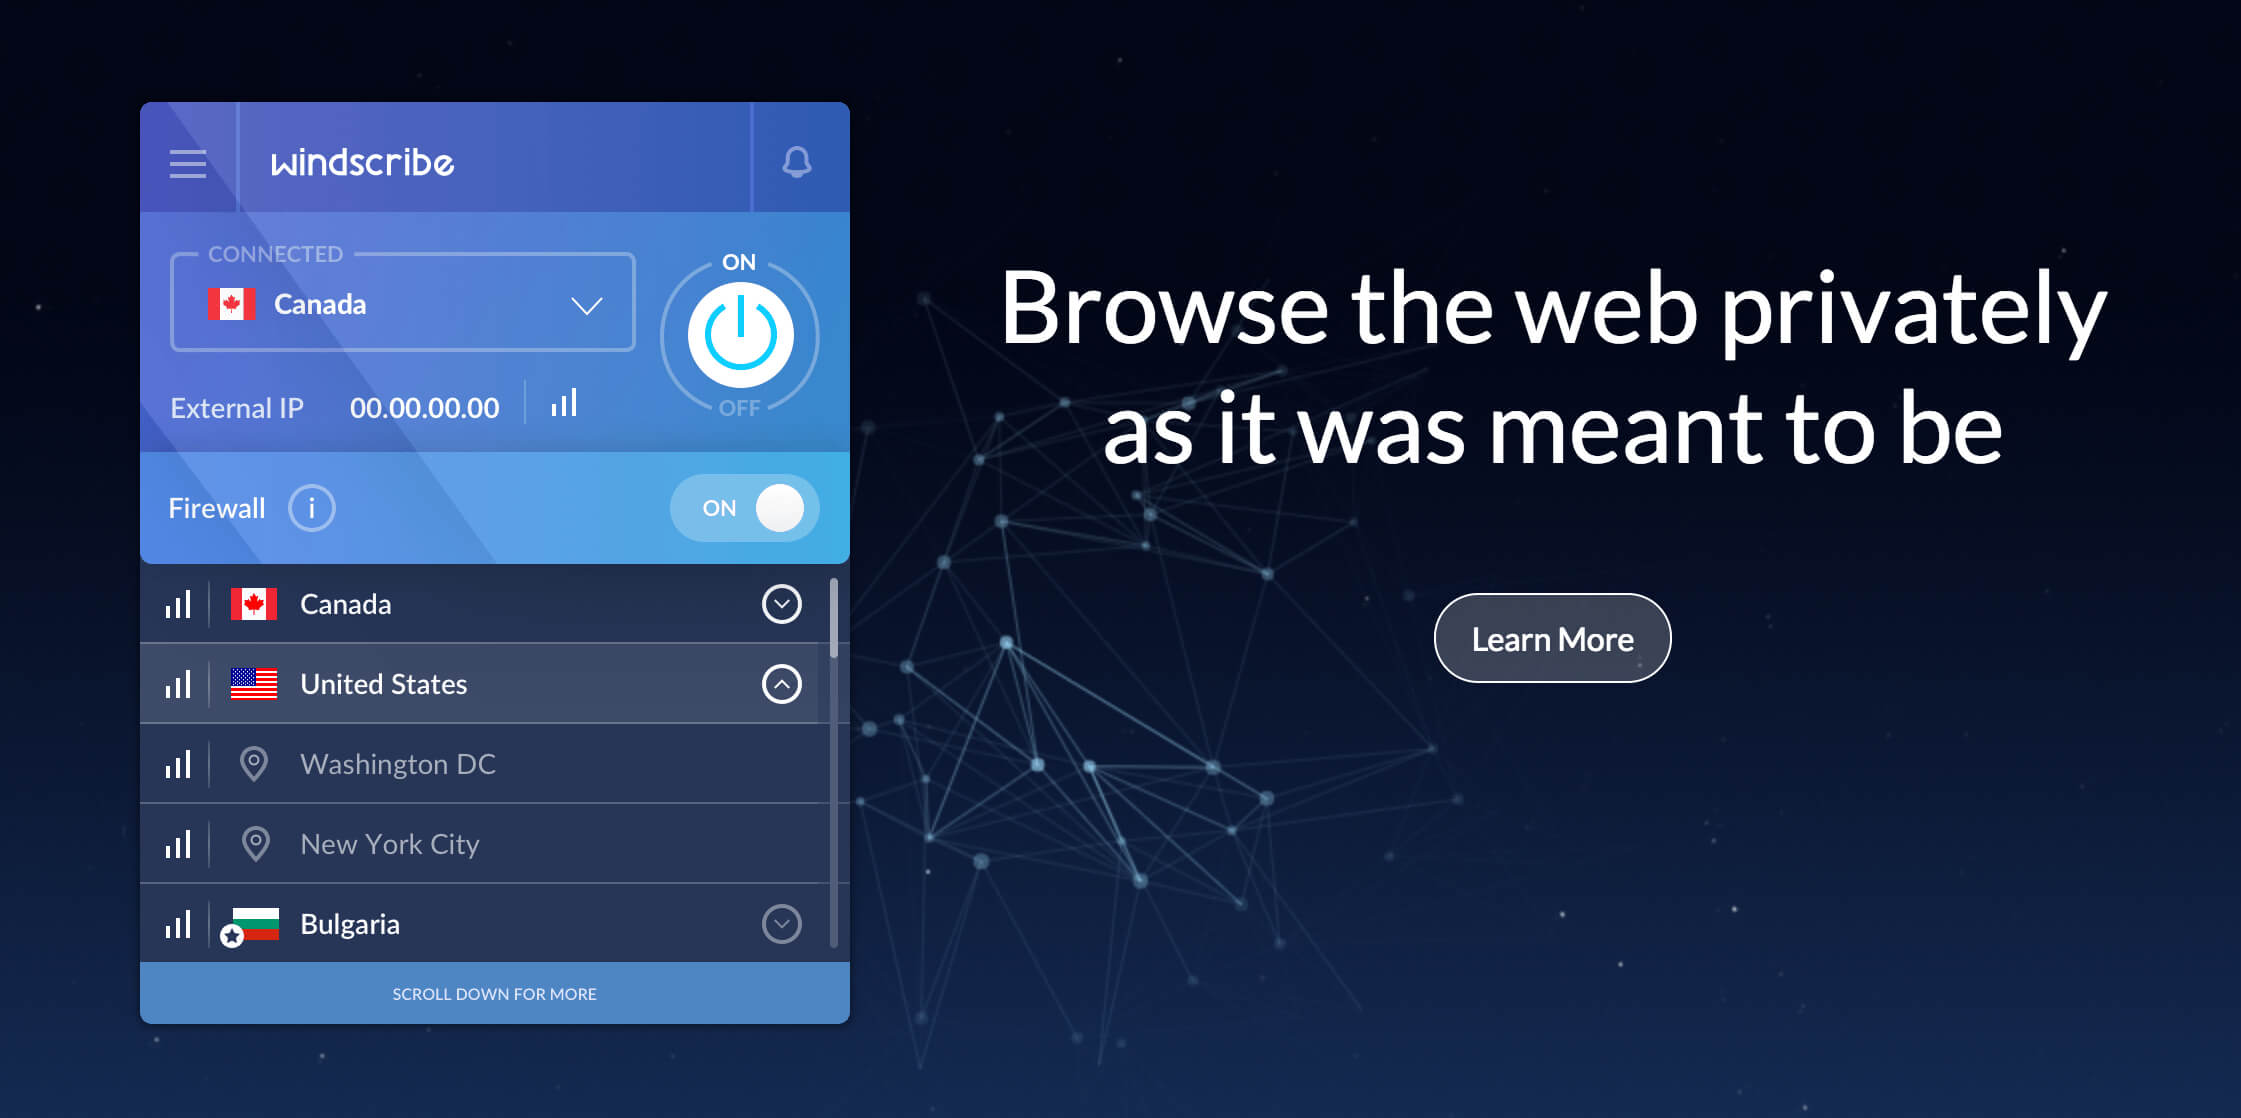 Net a lifetime of safe, private browsing for 90% off